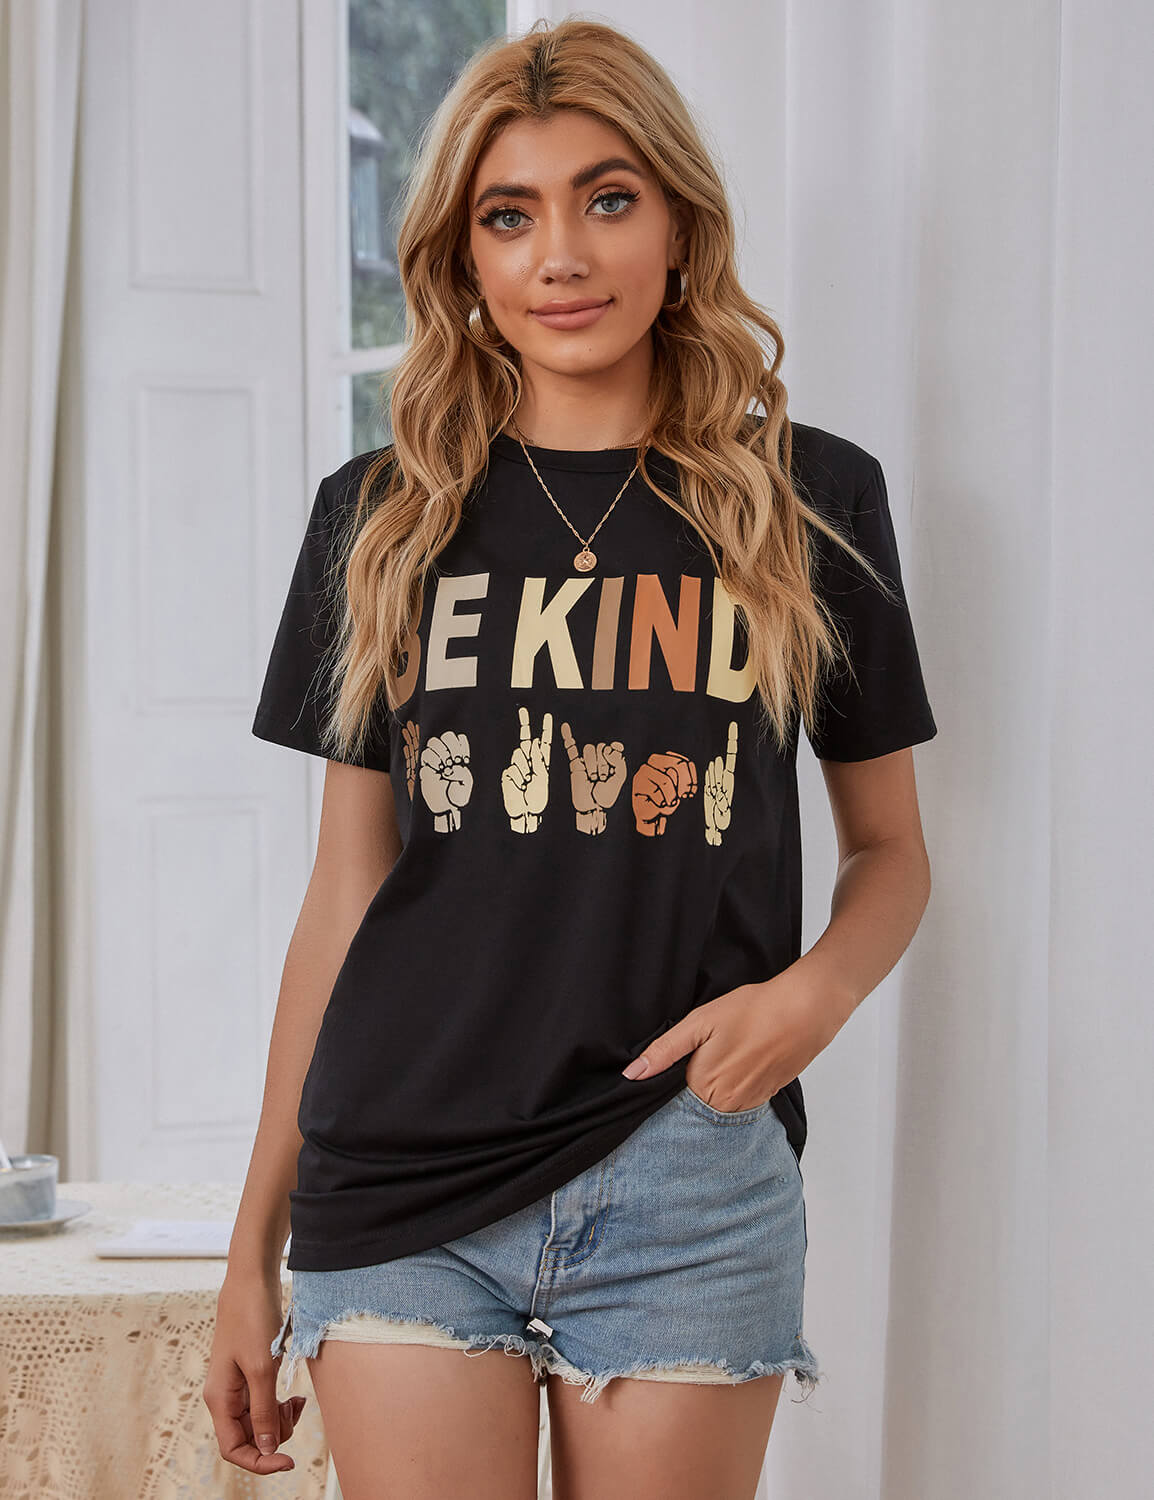 Be Kind Shirt with Hands Graphic Tee